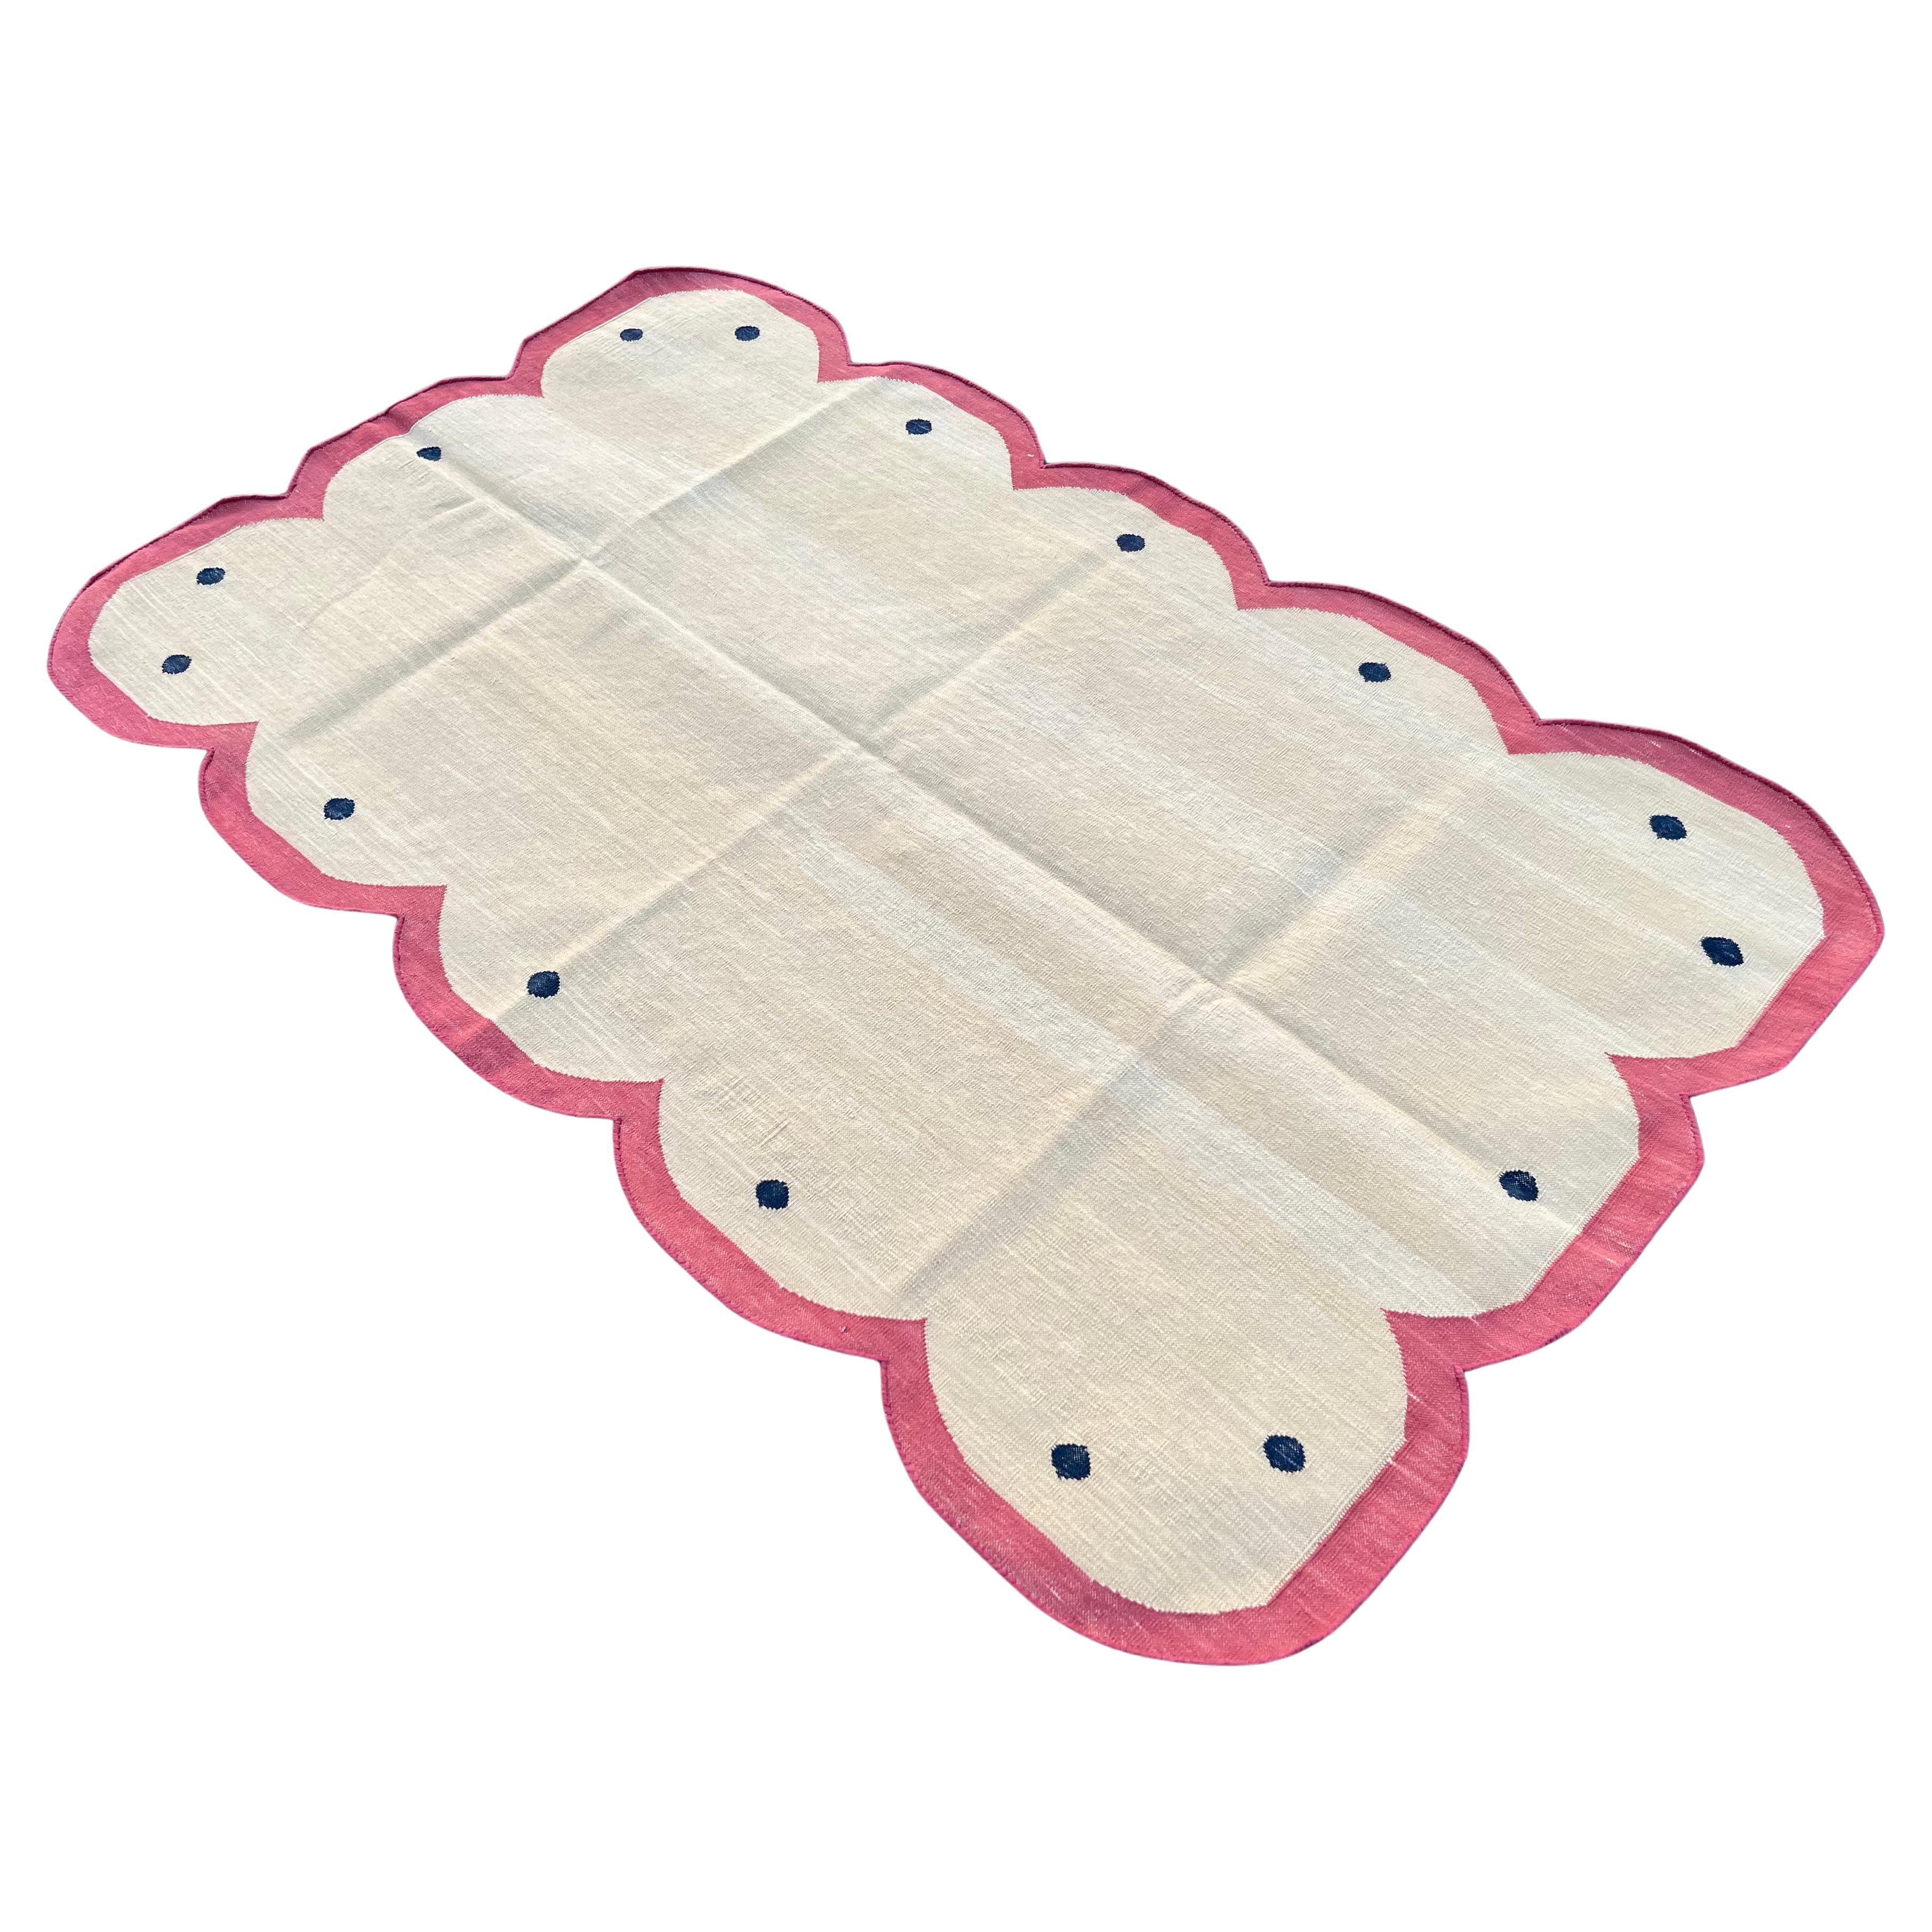 Handmade Cotton Area Flat Weave Rug, 3x5 Beige And Pink Scalloped Indian Dhurrie